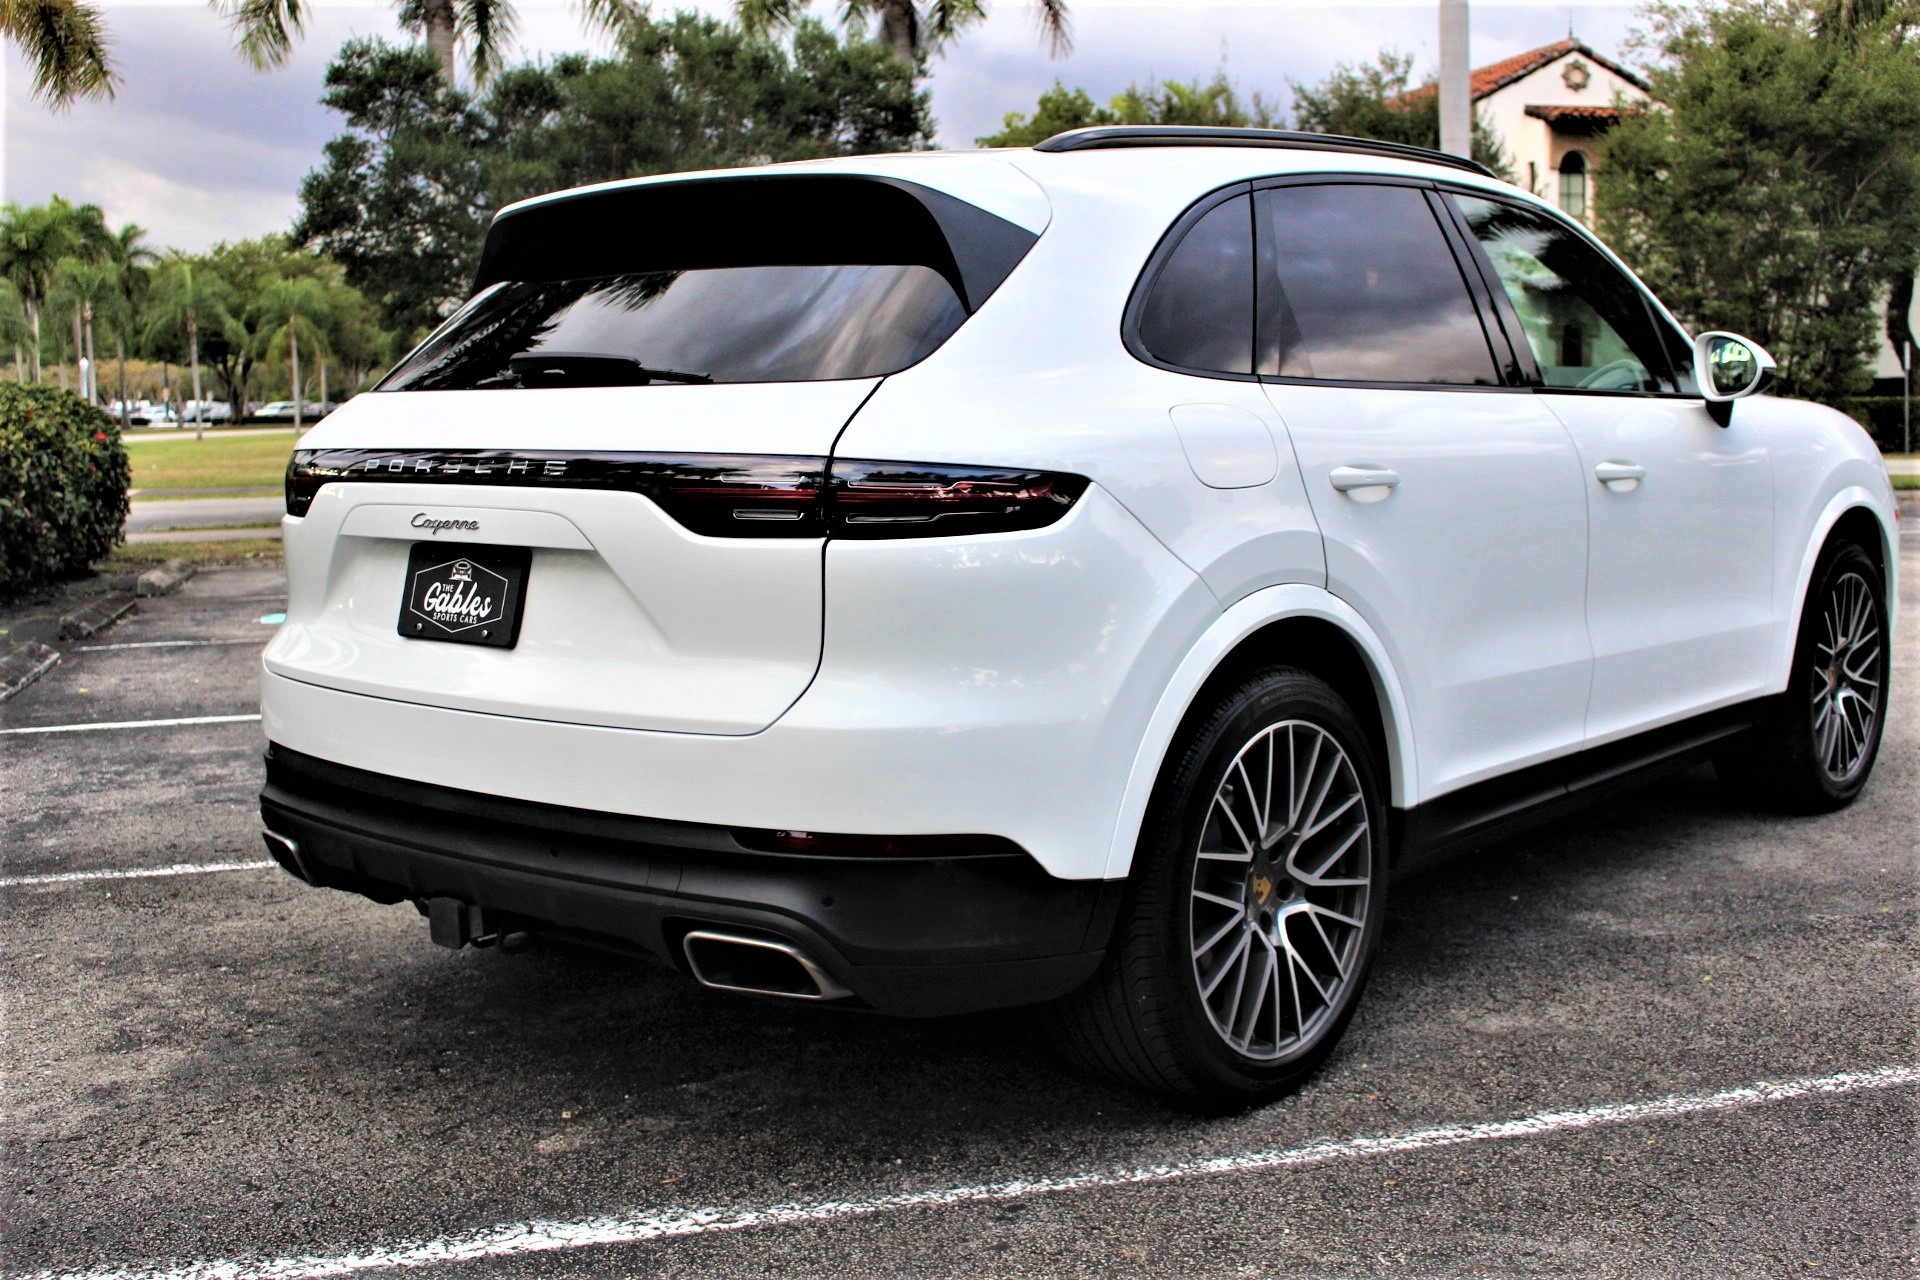 Used 2021 Porsche Cayenne for sale Sold at The Gables Sports Cars in Miami FL 33146 4